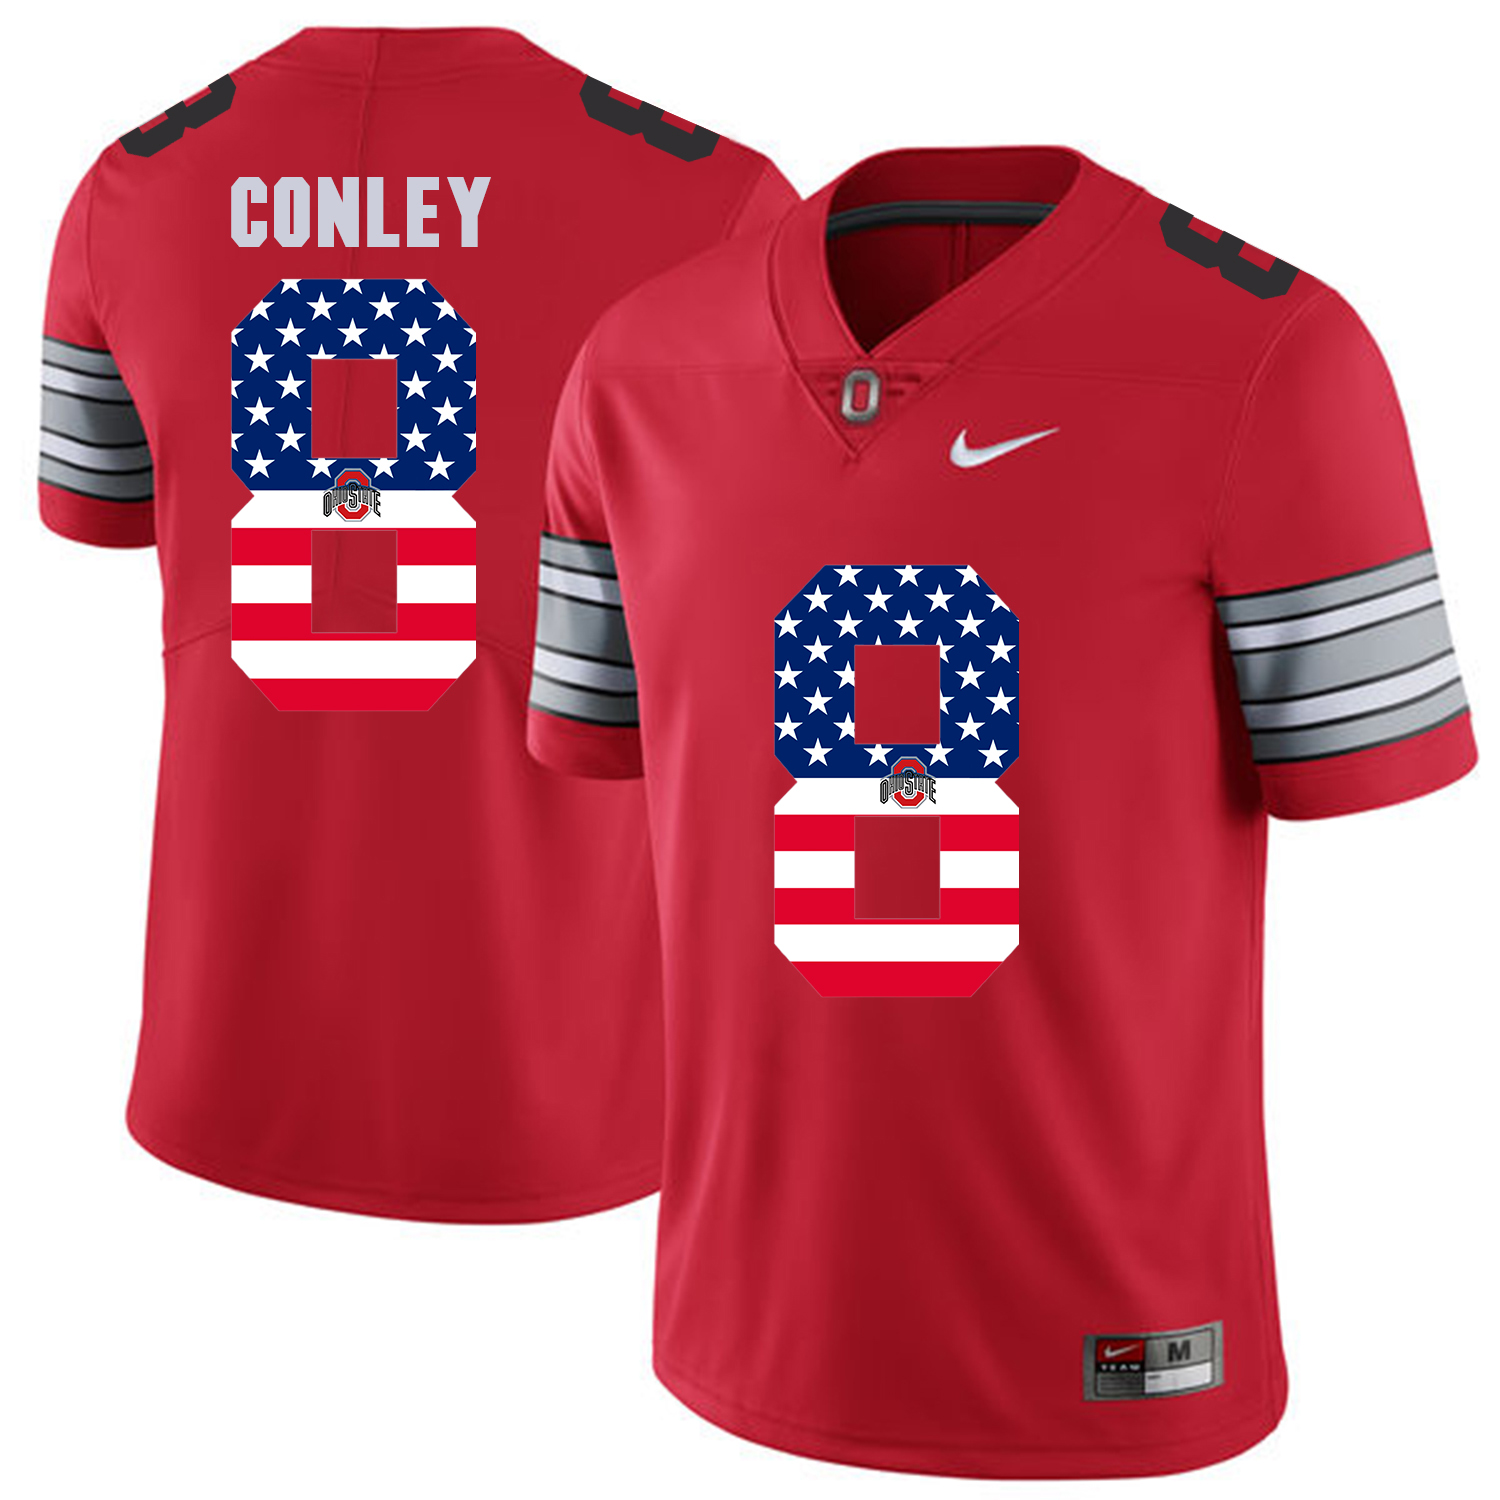 Men Ohio State 8 Conley Red Flag Customized NCAA Jerseys